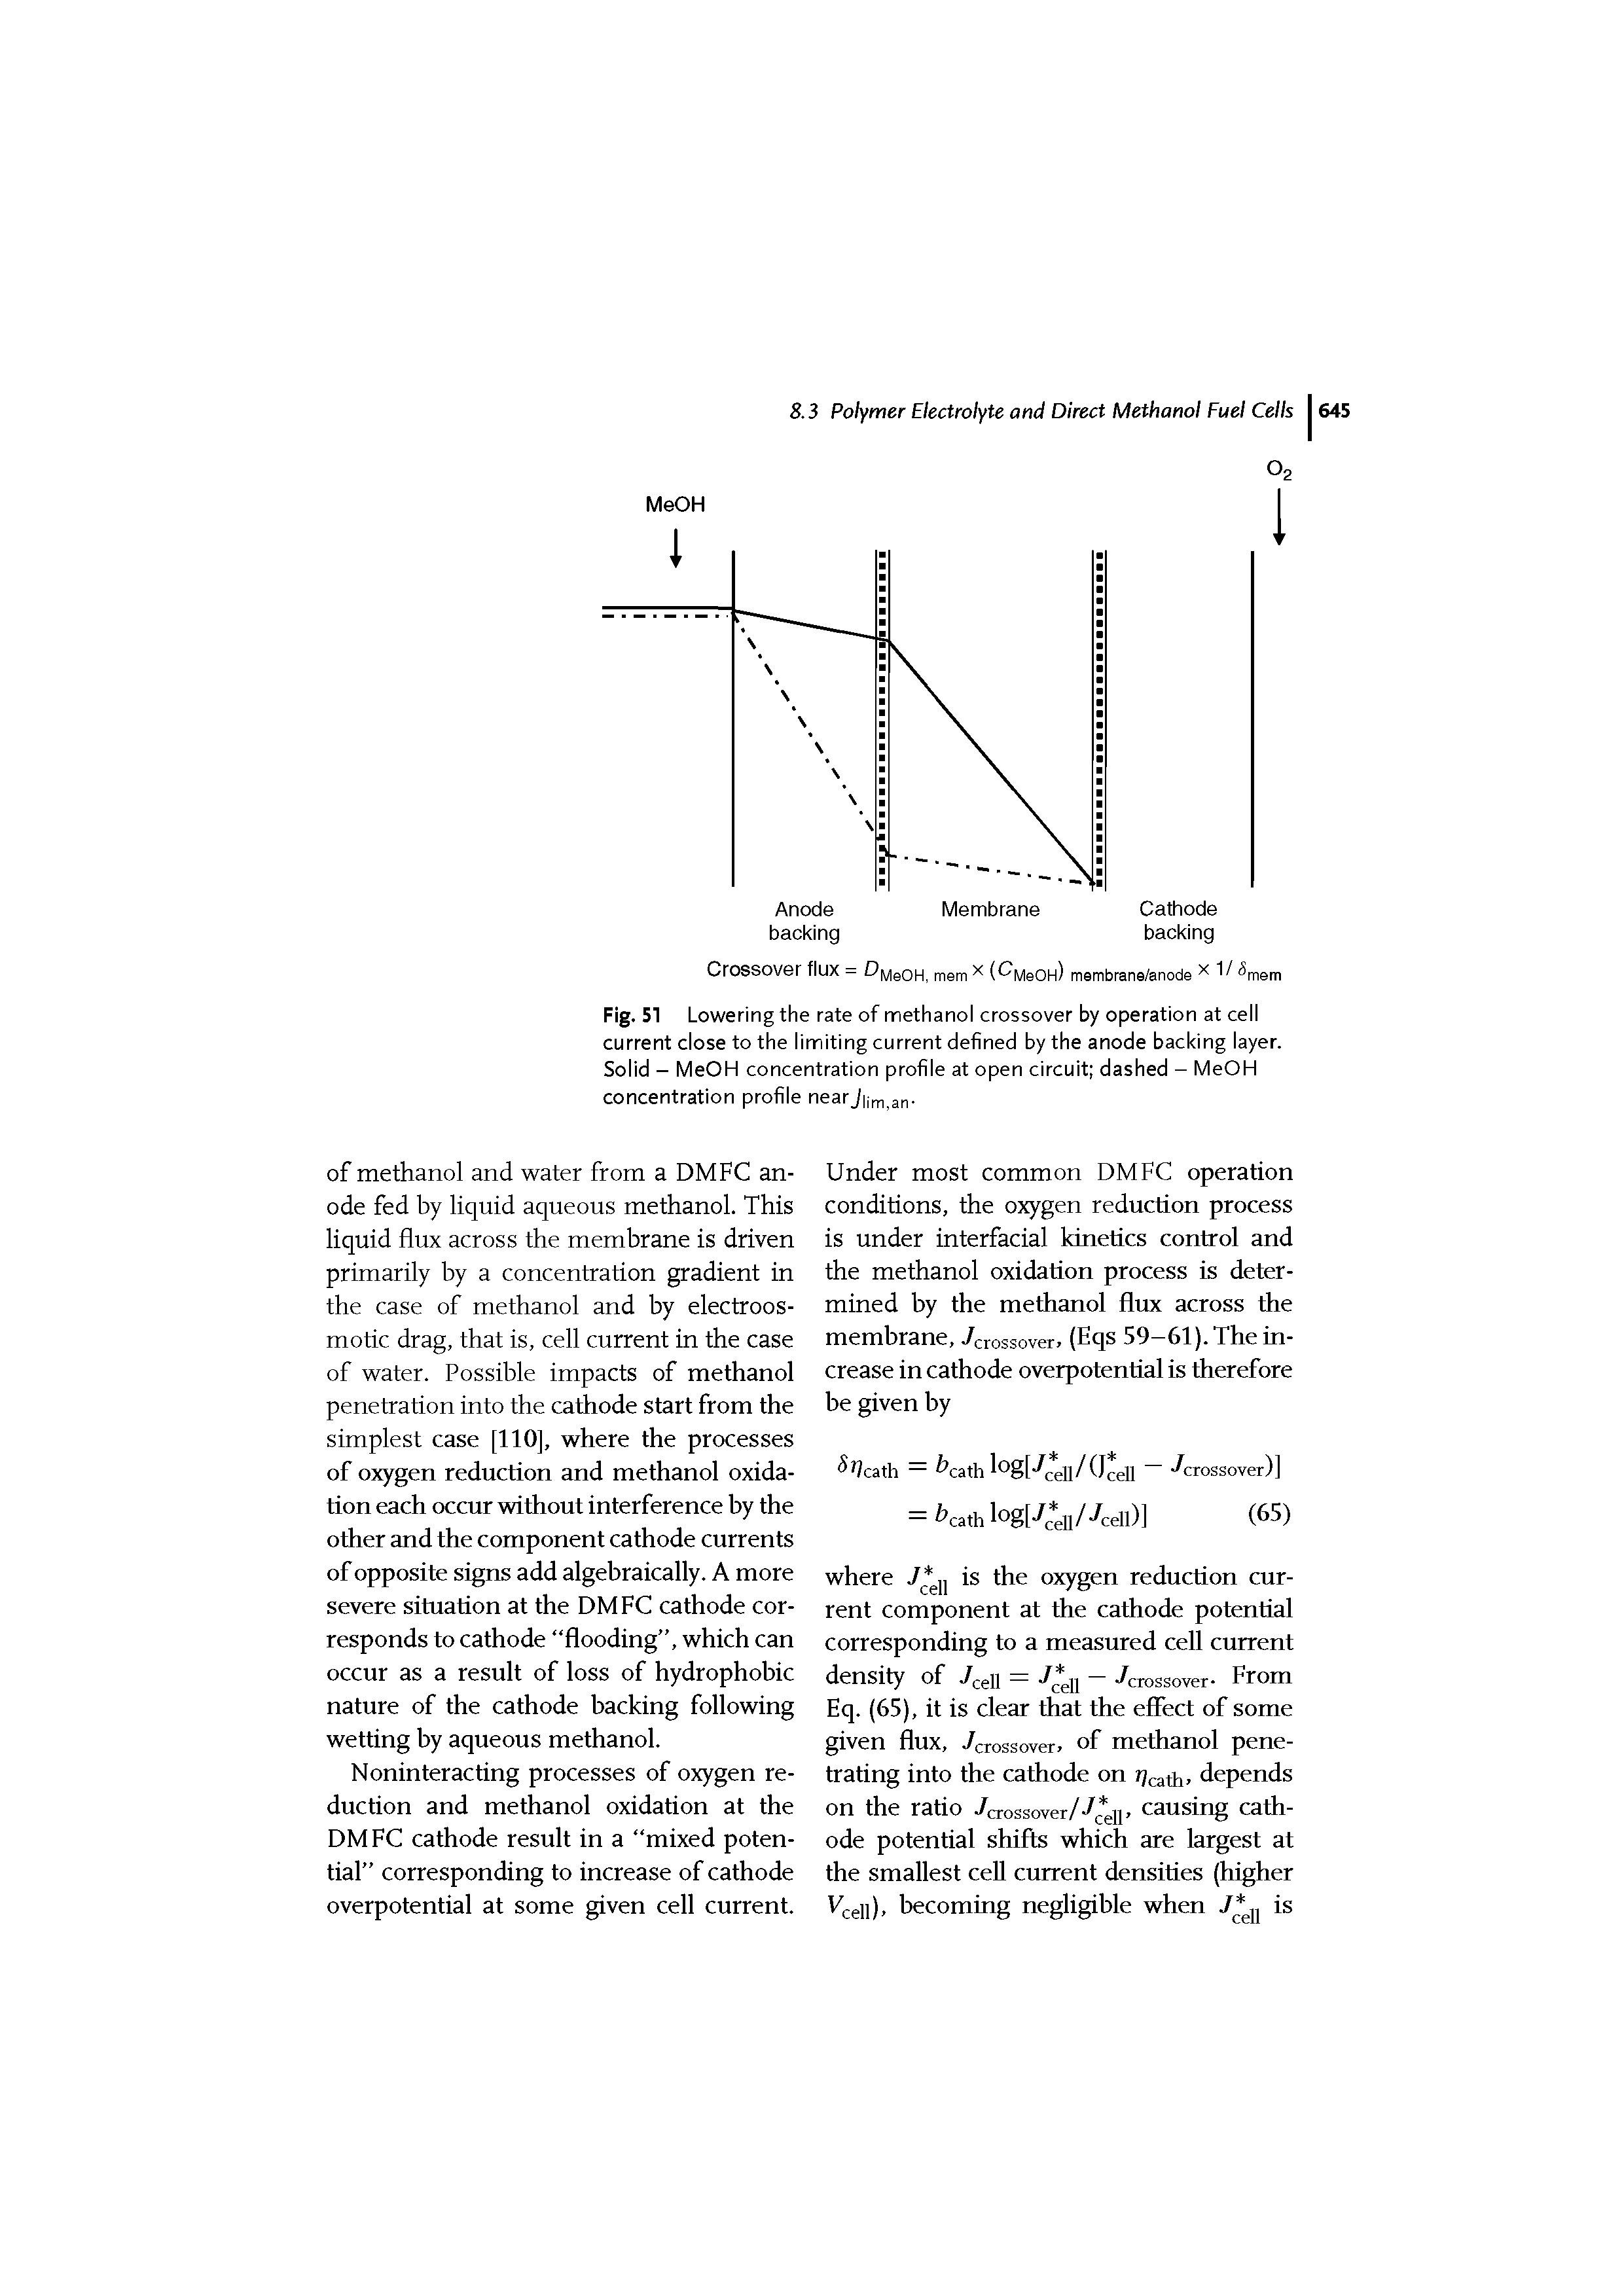 Fig. 51 Lowering the rate of methanol crossover by operation at cell current close to the limiting current defined by the anode backing layer. Solid - MeOH concentration profile at open circuit dashed - MeOH concentration profile nearJ iman.